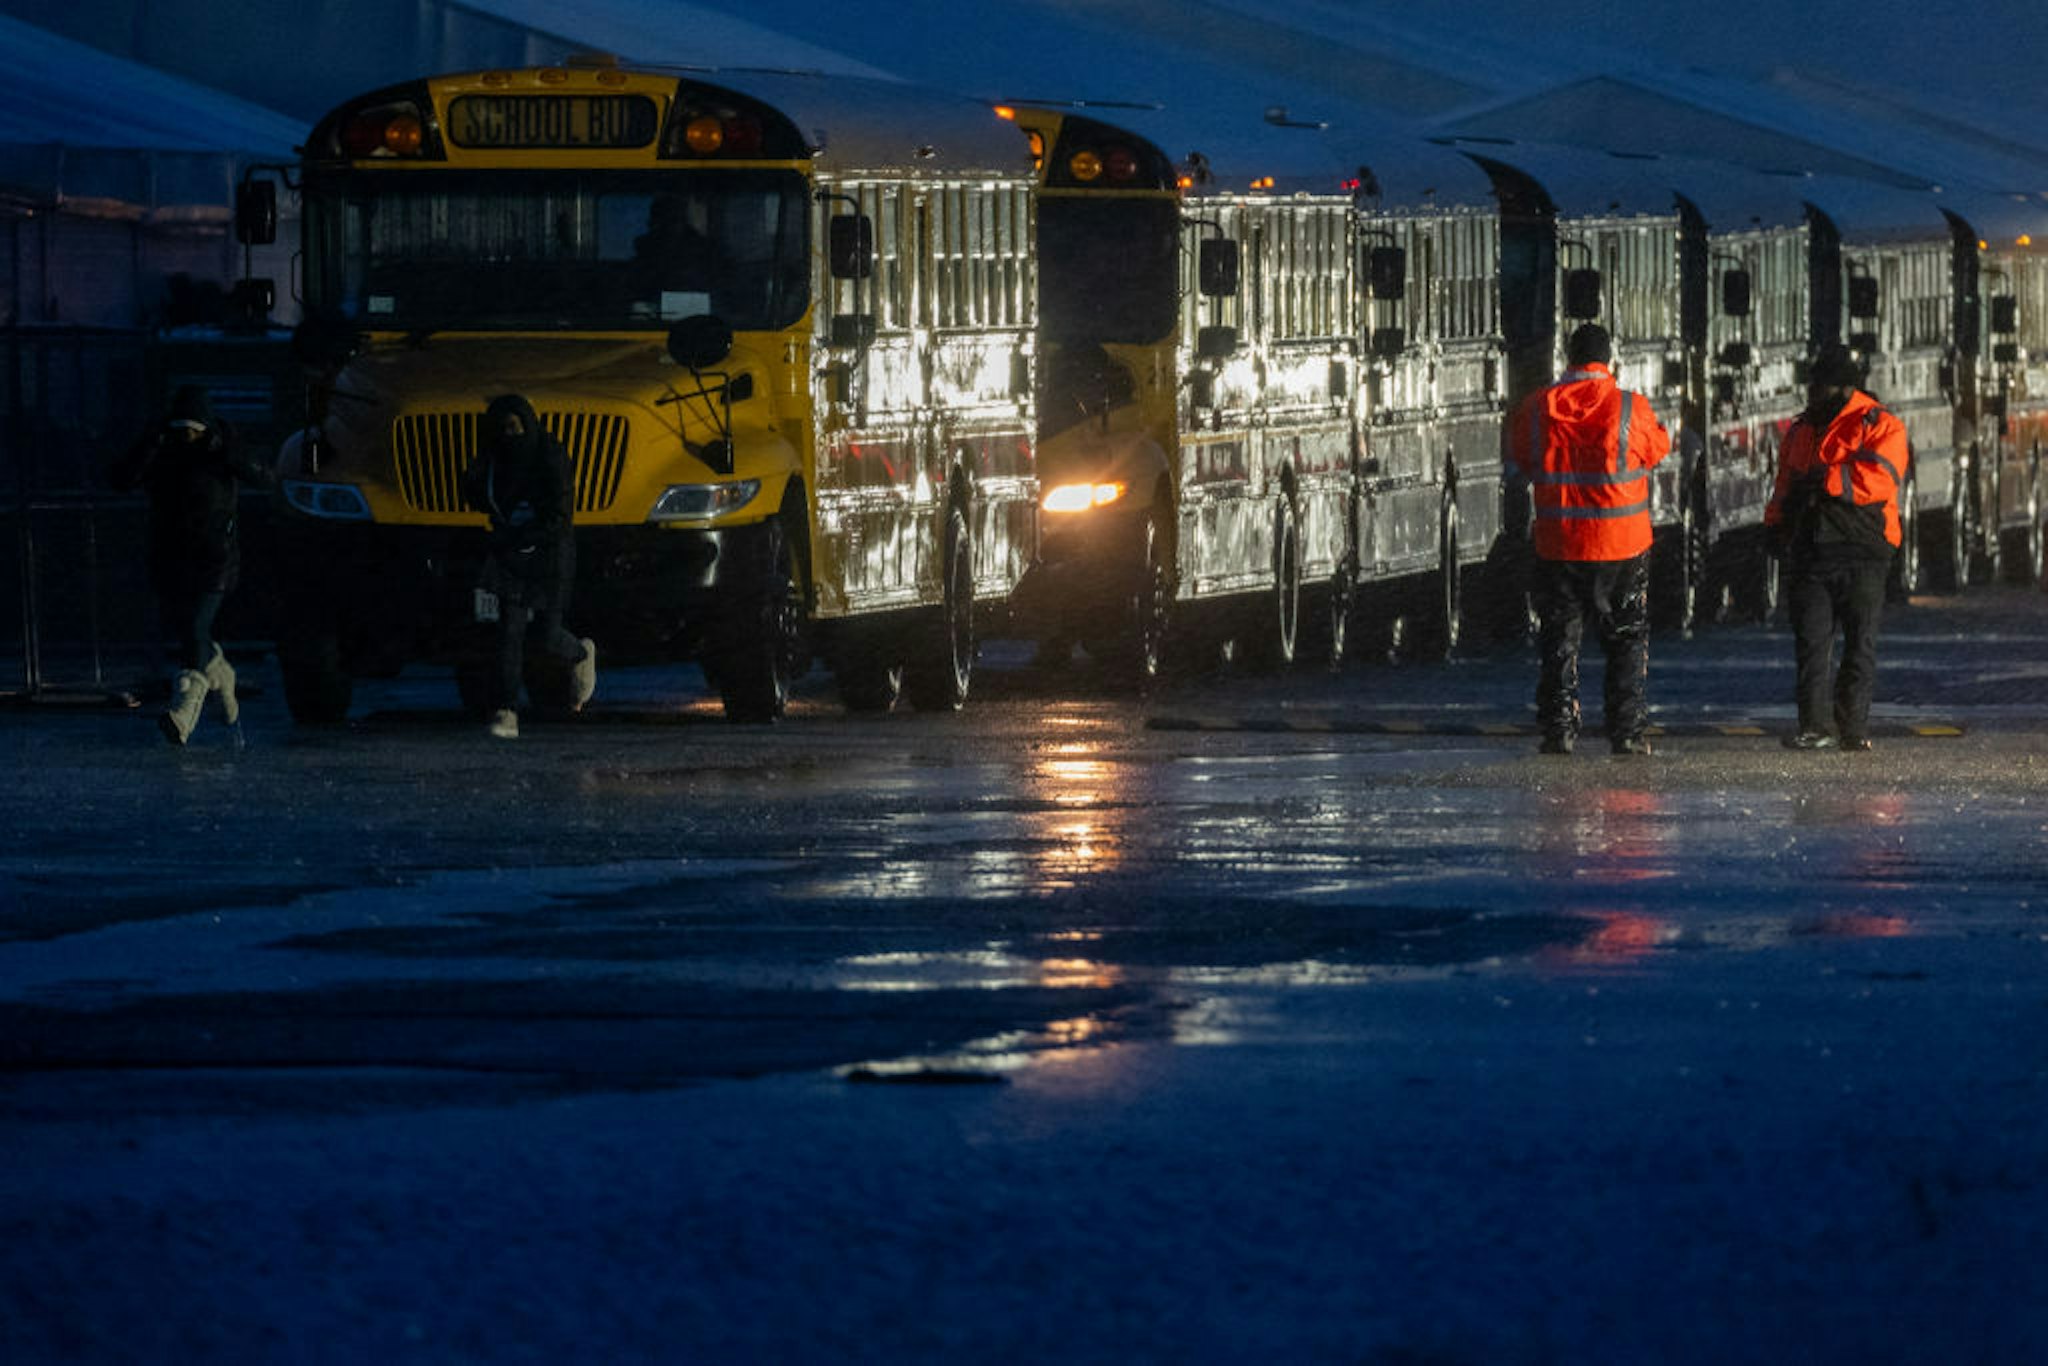 NEW YORK, NEW YORK - JANUARY 09: Nearly 2,000 migrants are evacuated by school buses from tents at Floyd Bennett Field to a local high school in preparation for a storm with estimated wind speeds to be more than 70 mph. on January 09, 2024 in the Brooklyn borough of New York City. Amid the arrival of winter weather, many migrant families are being forced to re-apply for shelter after reaching the 60-day limit for city housing. More than 4,000 families have been served notice on a rolling basis that they will need to re-apply without guarantee of receiving a place. More than 100,000 migrants have arrived in New York City over the last year. (Photo by Spencer Platt/Getty Images)